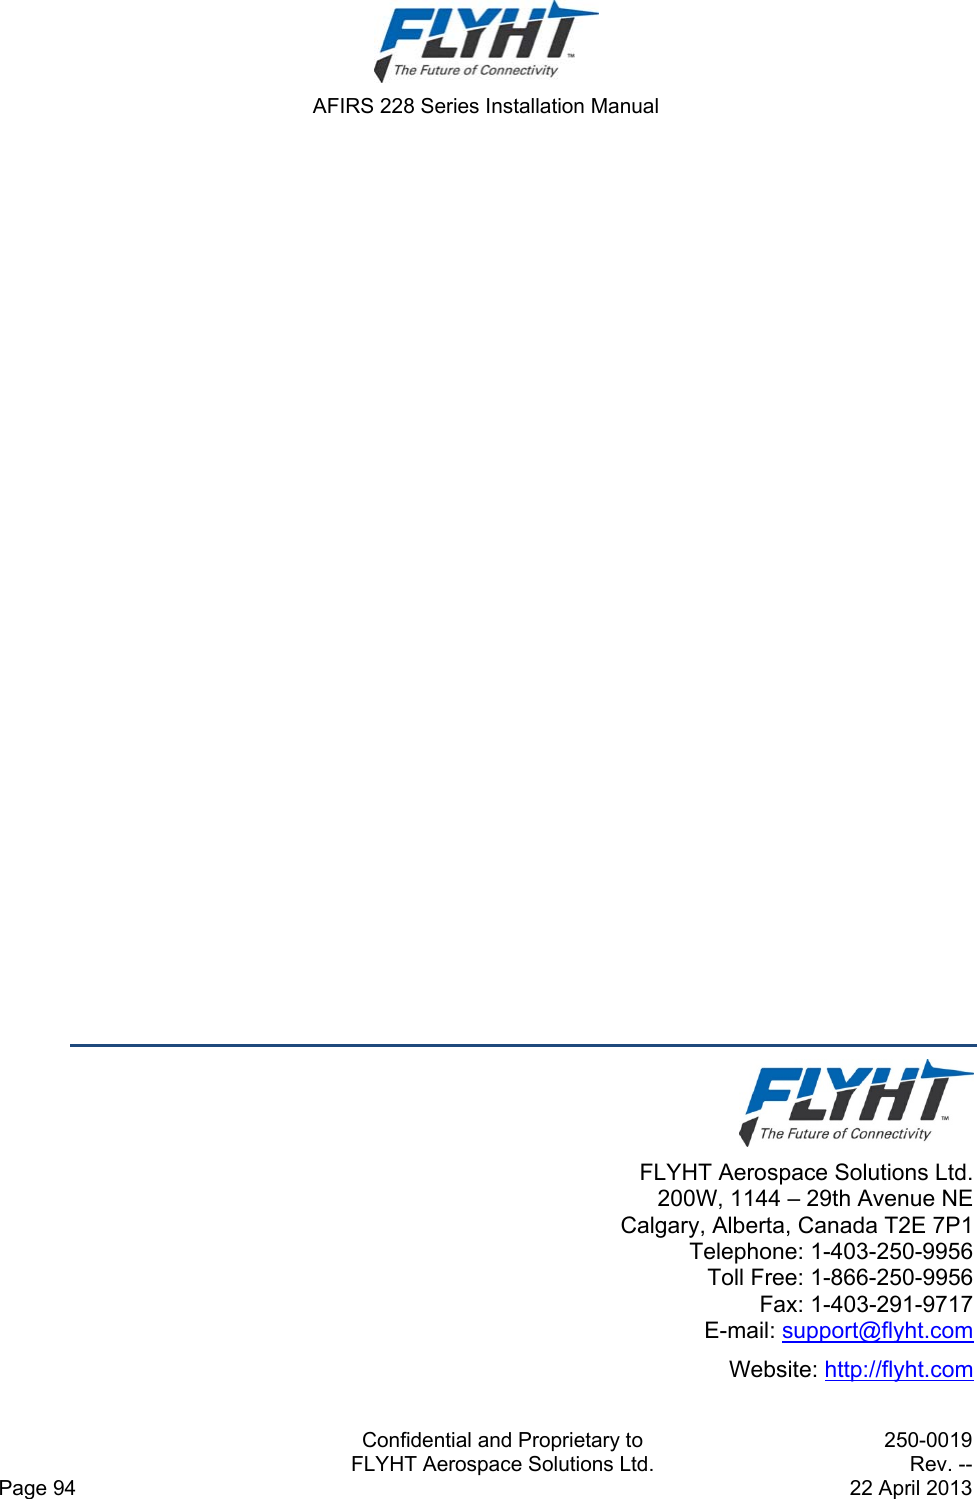  AFIRS 228 Series Installation Manual   Confidential and Proprietary to  250-0019   FLYHT Aerospace Solutions Ltd.  Rev. -- Page 94    22 April 2013                         FLYHT Aerospace Solutions Ltd.  200W, 1144 – 29th Avenue NE Calgary, Alberta, Canada T2E 7P1 Telephone: 1-403-250-9956 Toll Free: 1-866-250-9956 Fax: 1-403-291-9717 E-mail: support@flyht.com Website: http://flyht.com 